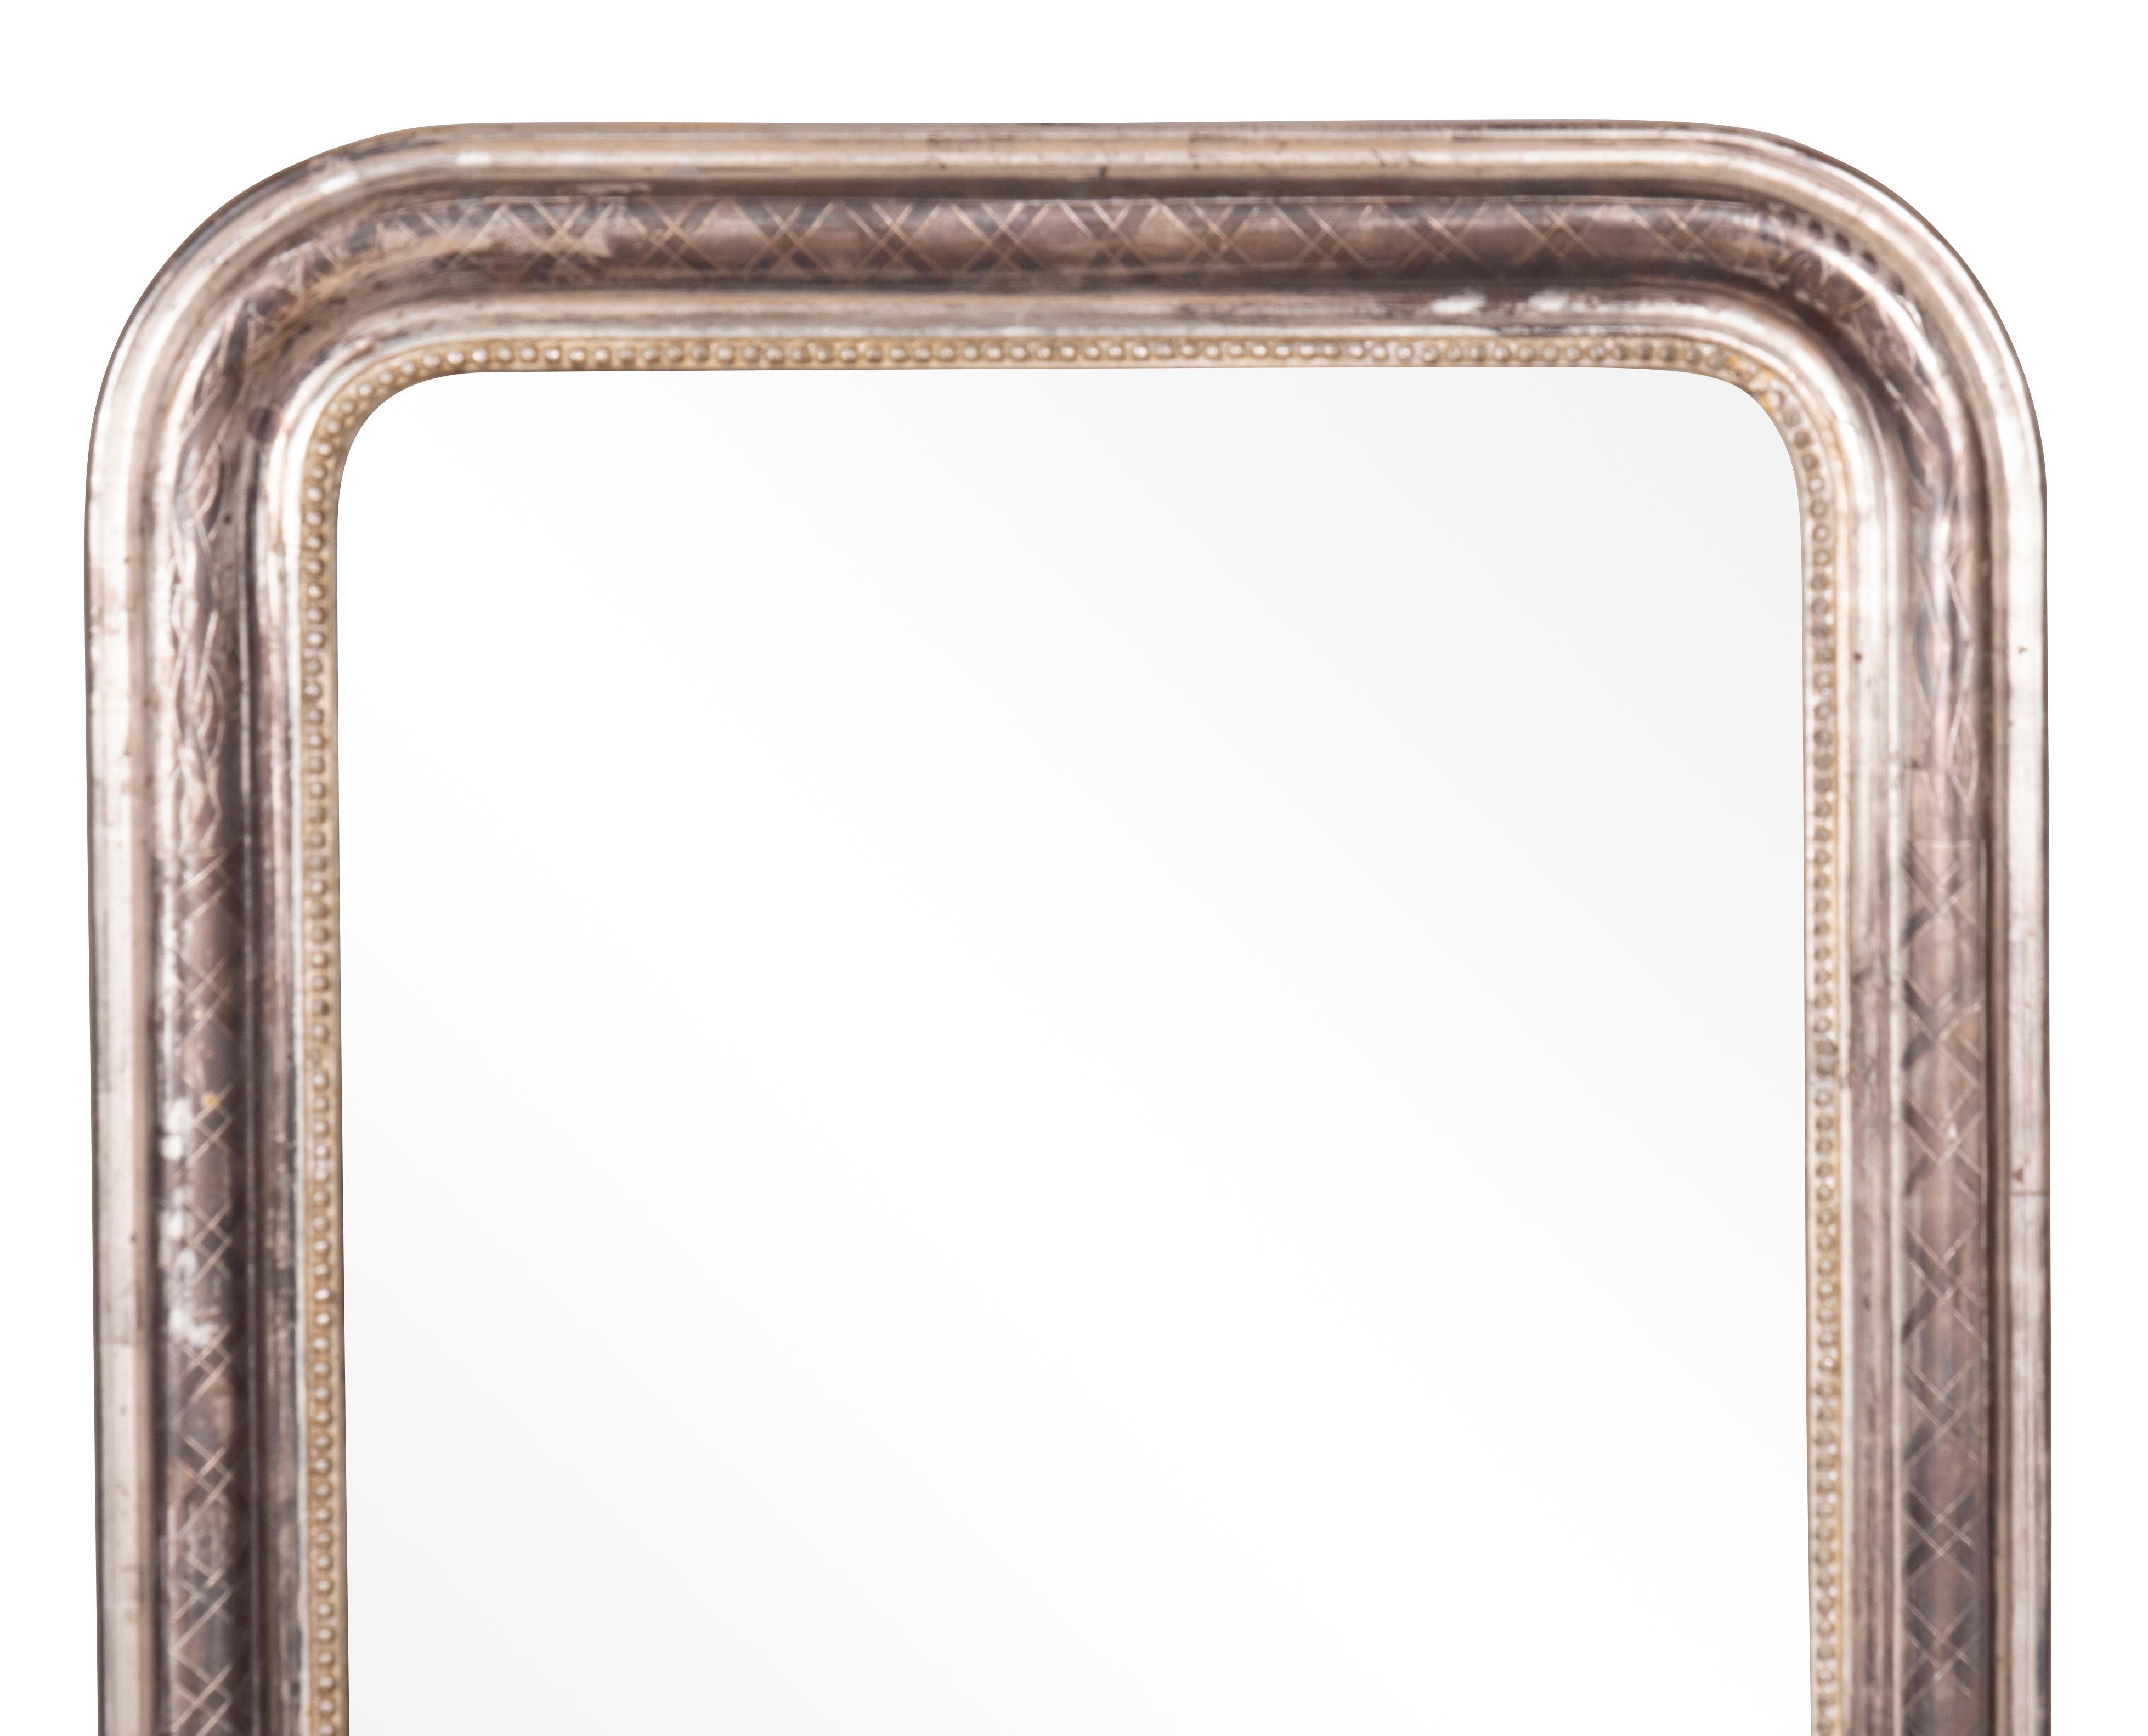 Rectangular with rounded top corners. Molded oxidized silvered frame with etched decoration and beaded inner edge.